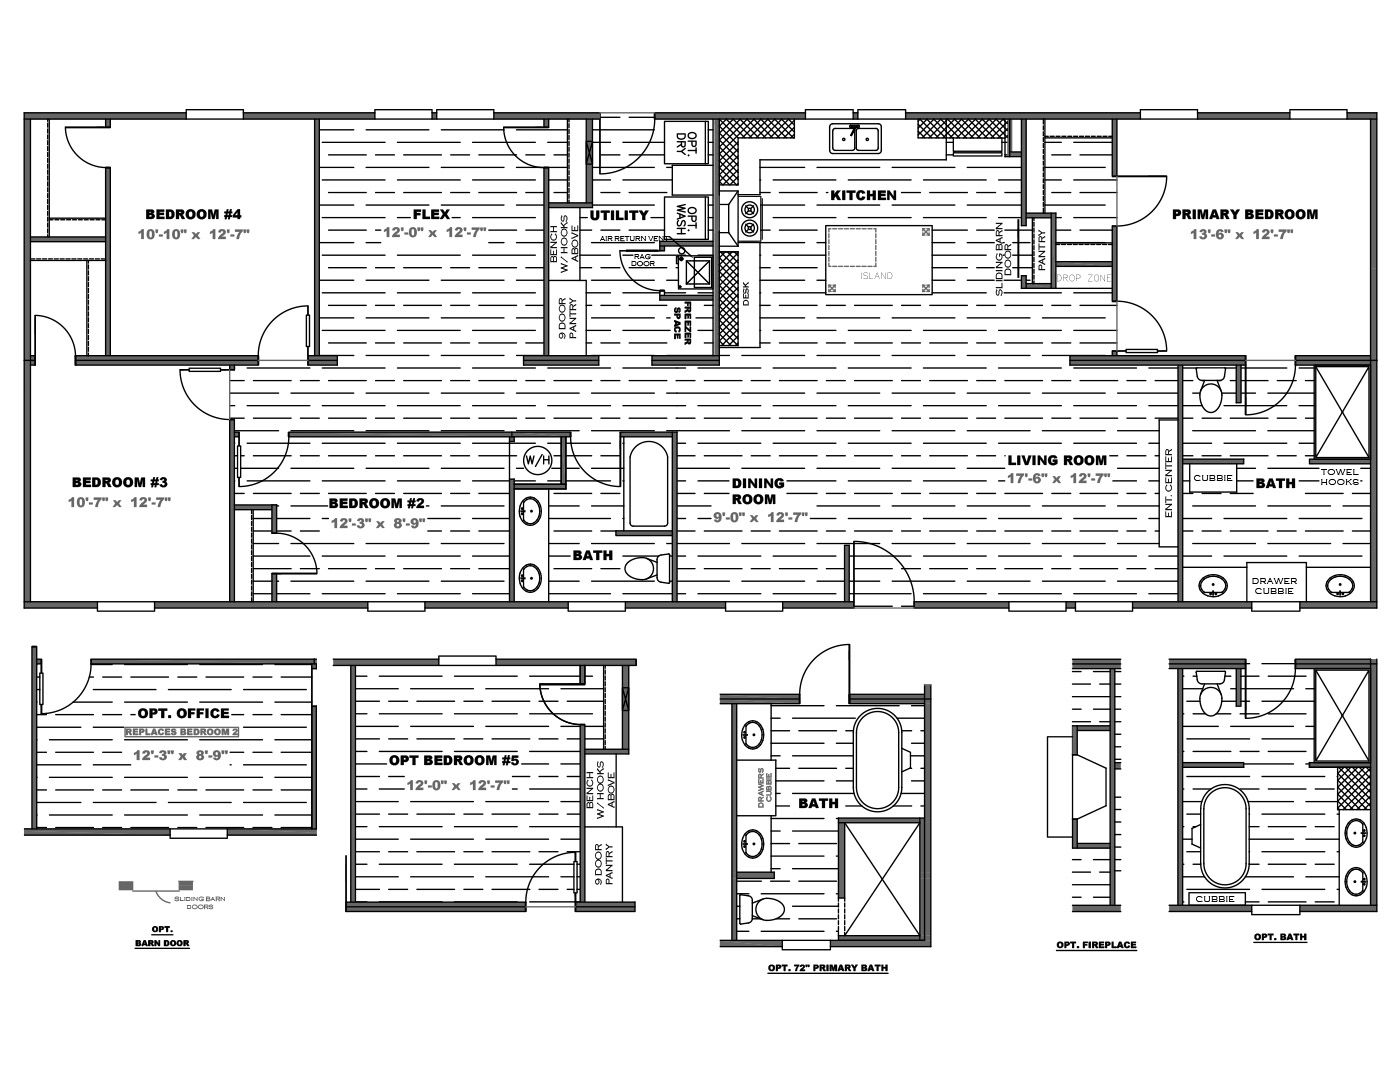 The FARMHOUSE BREEZE 72 Floor Plan. This Manufactured Mobile Home features 4 bedrooms and 2 baths.